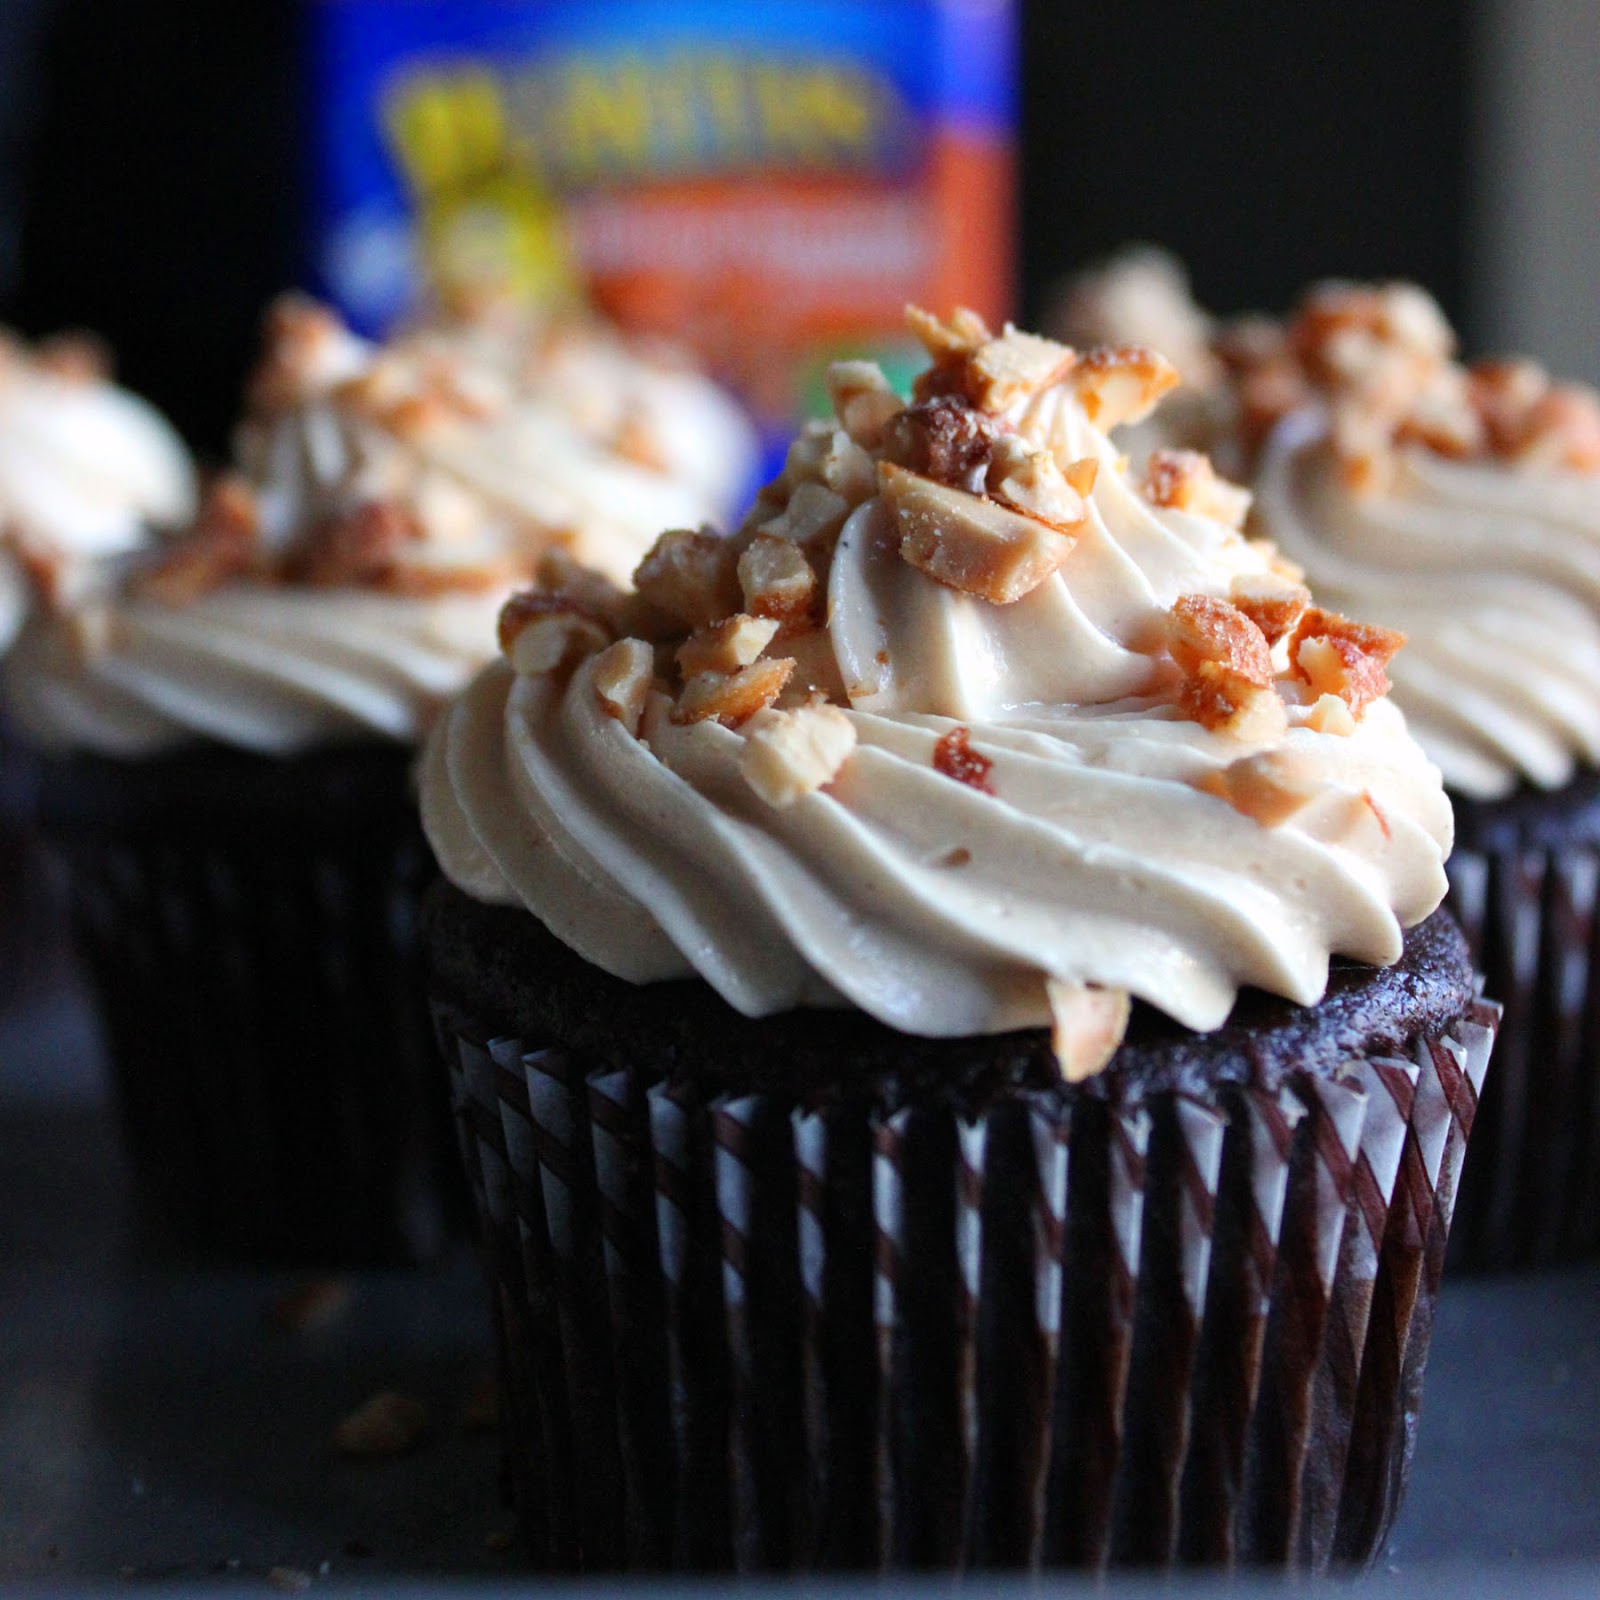 Chocolate Cupcake With Peanut Butter Filling